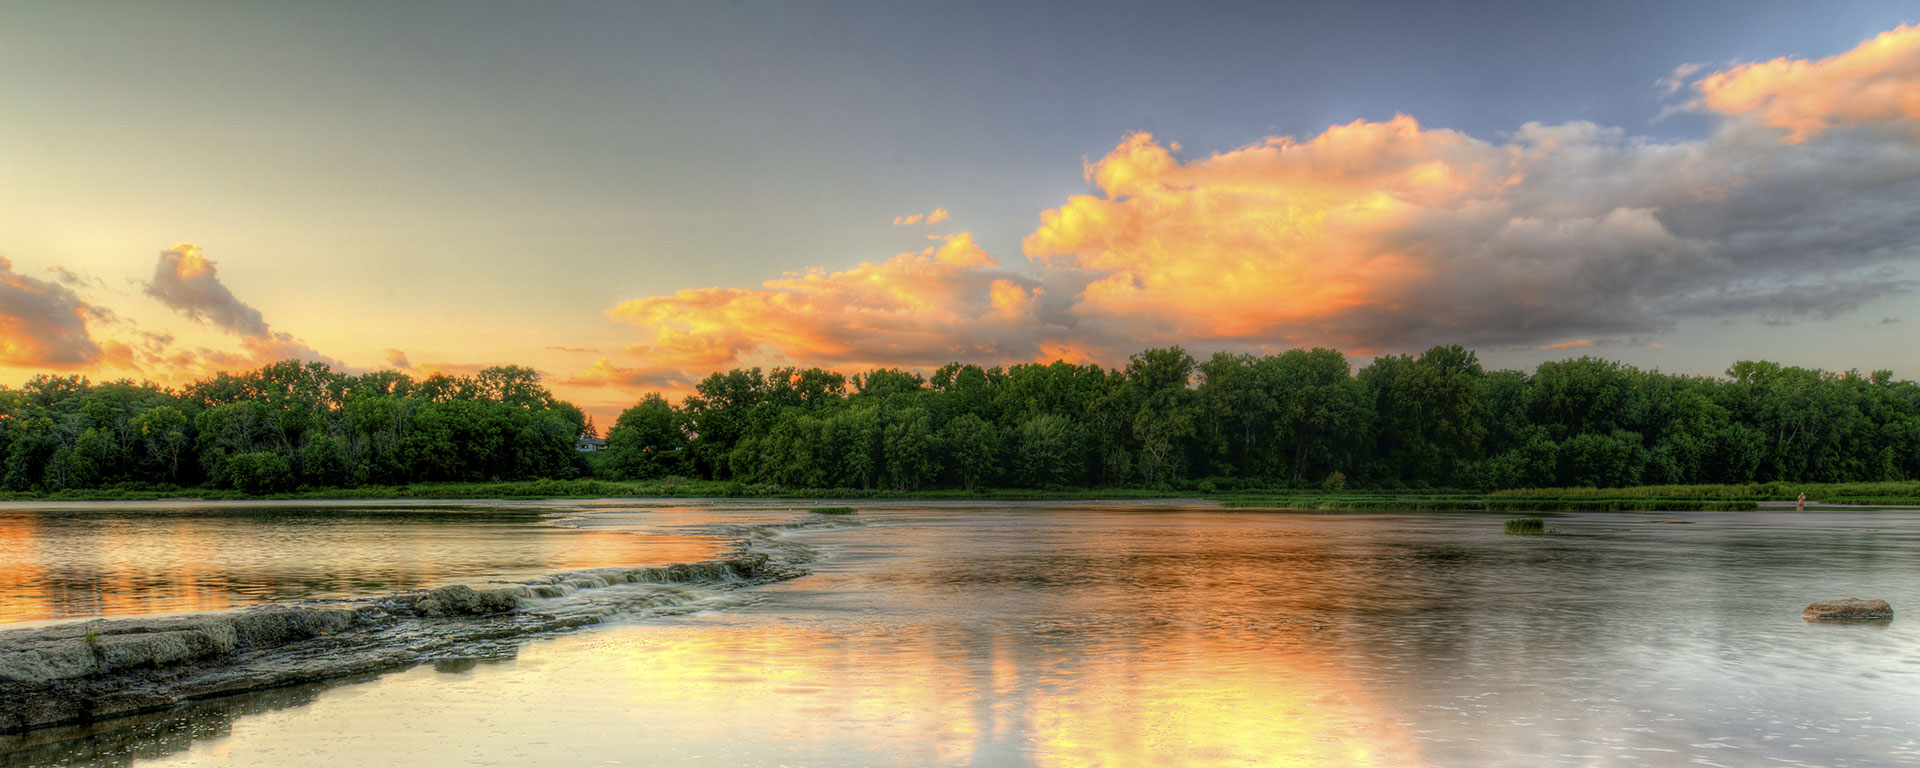 landscape of river, sky and trees at sunset